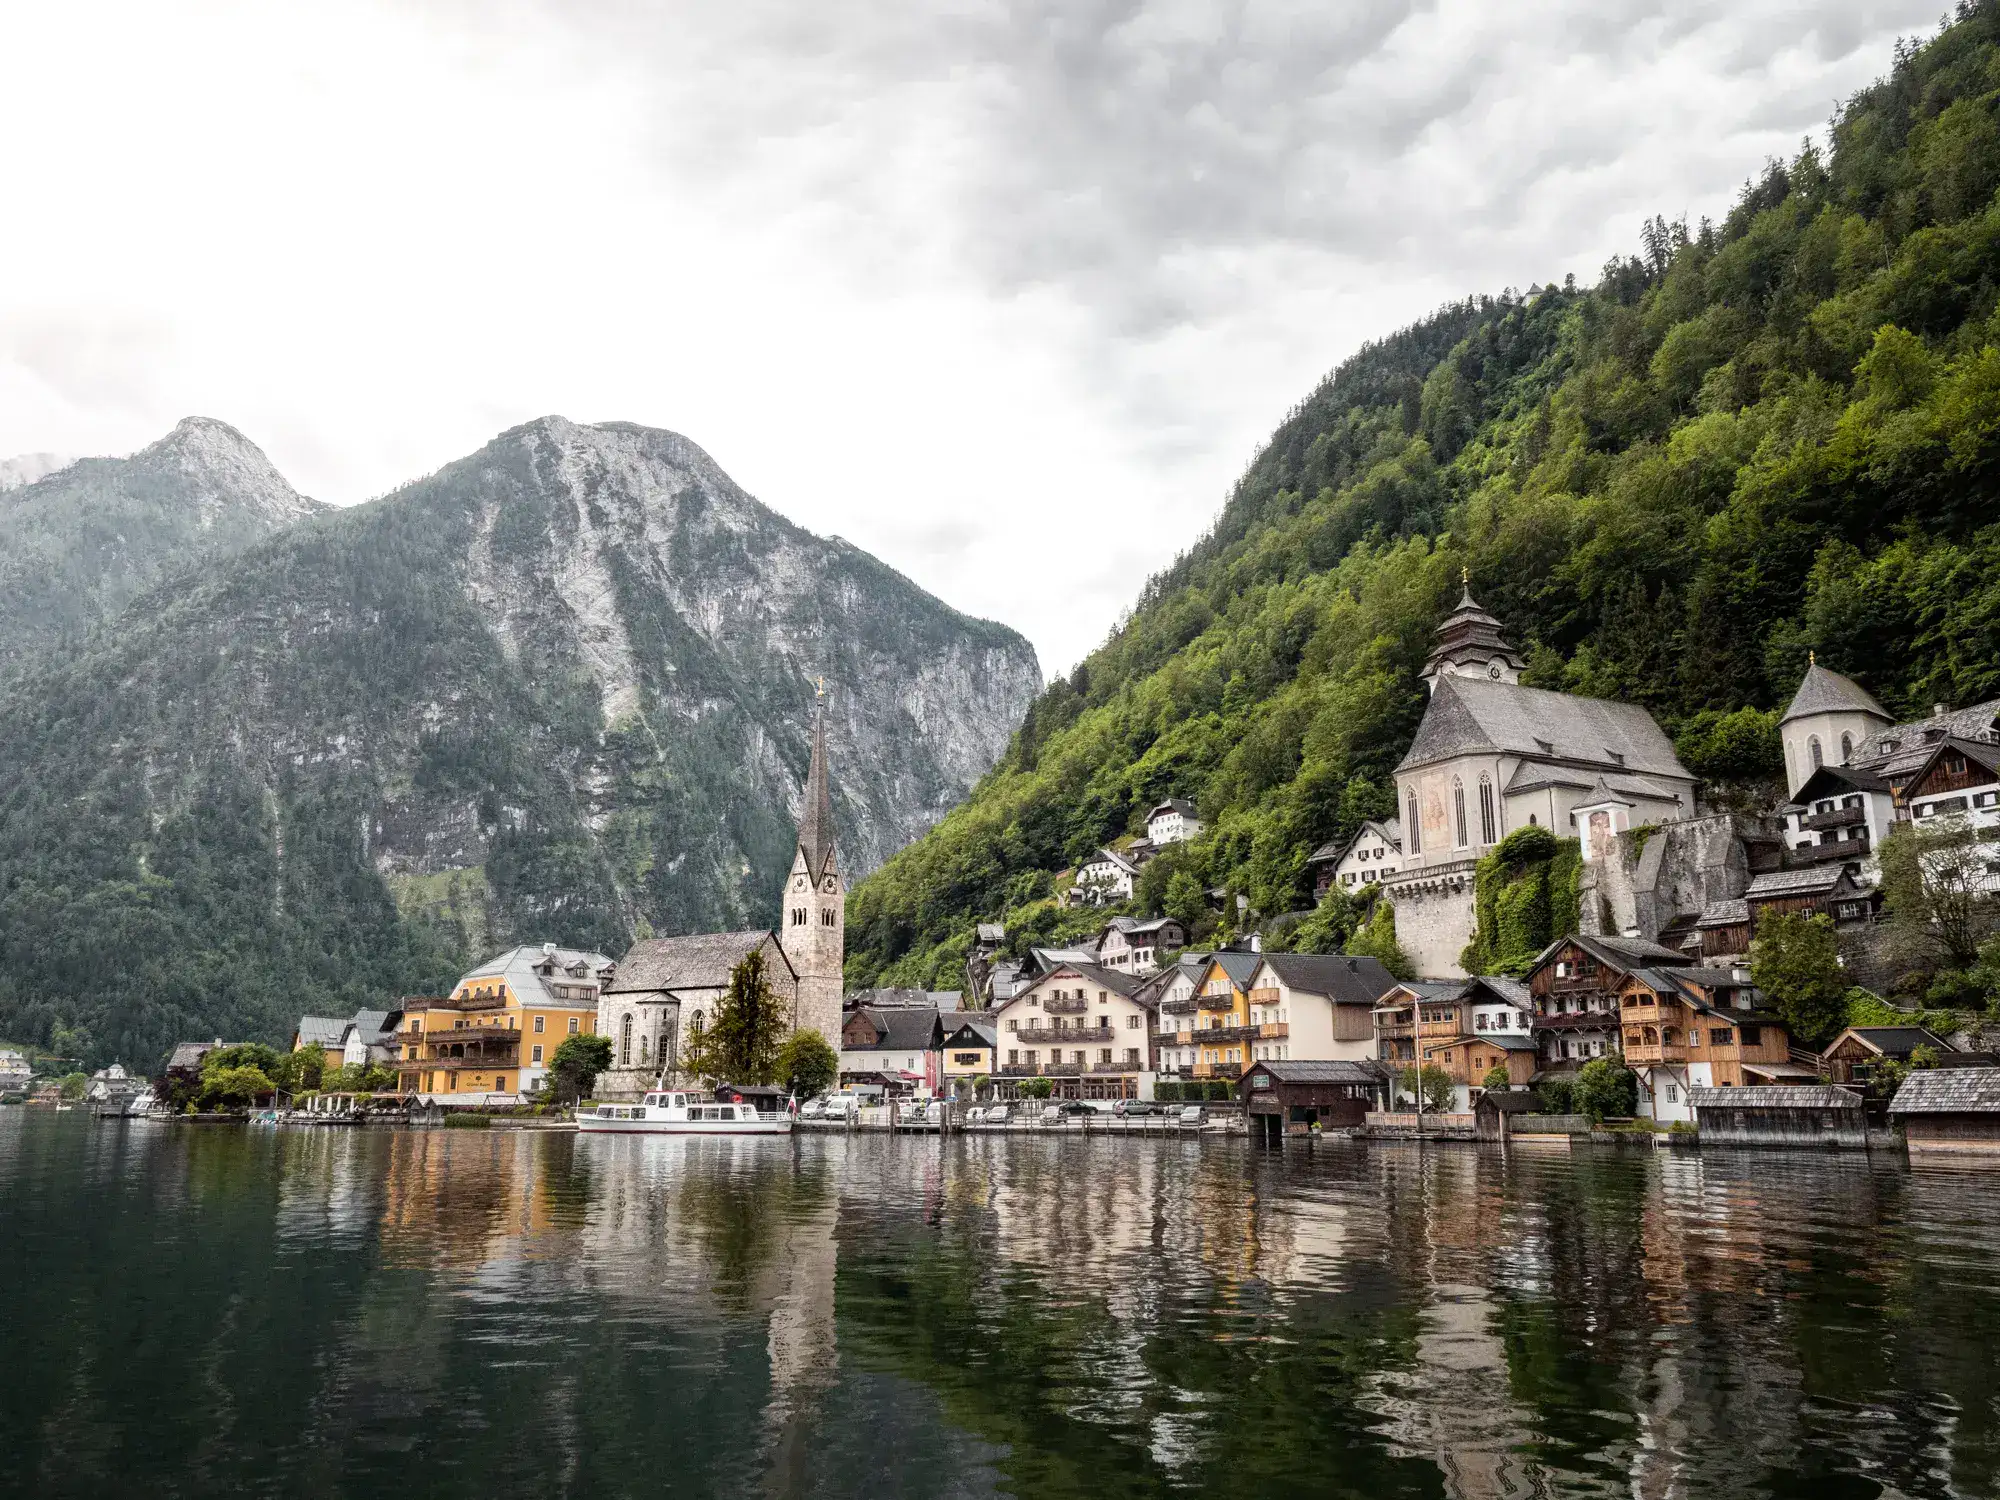 Hallstatt, with the idyllic view of the church tower, the lake, and the mountains in the background.